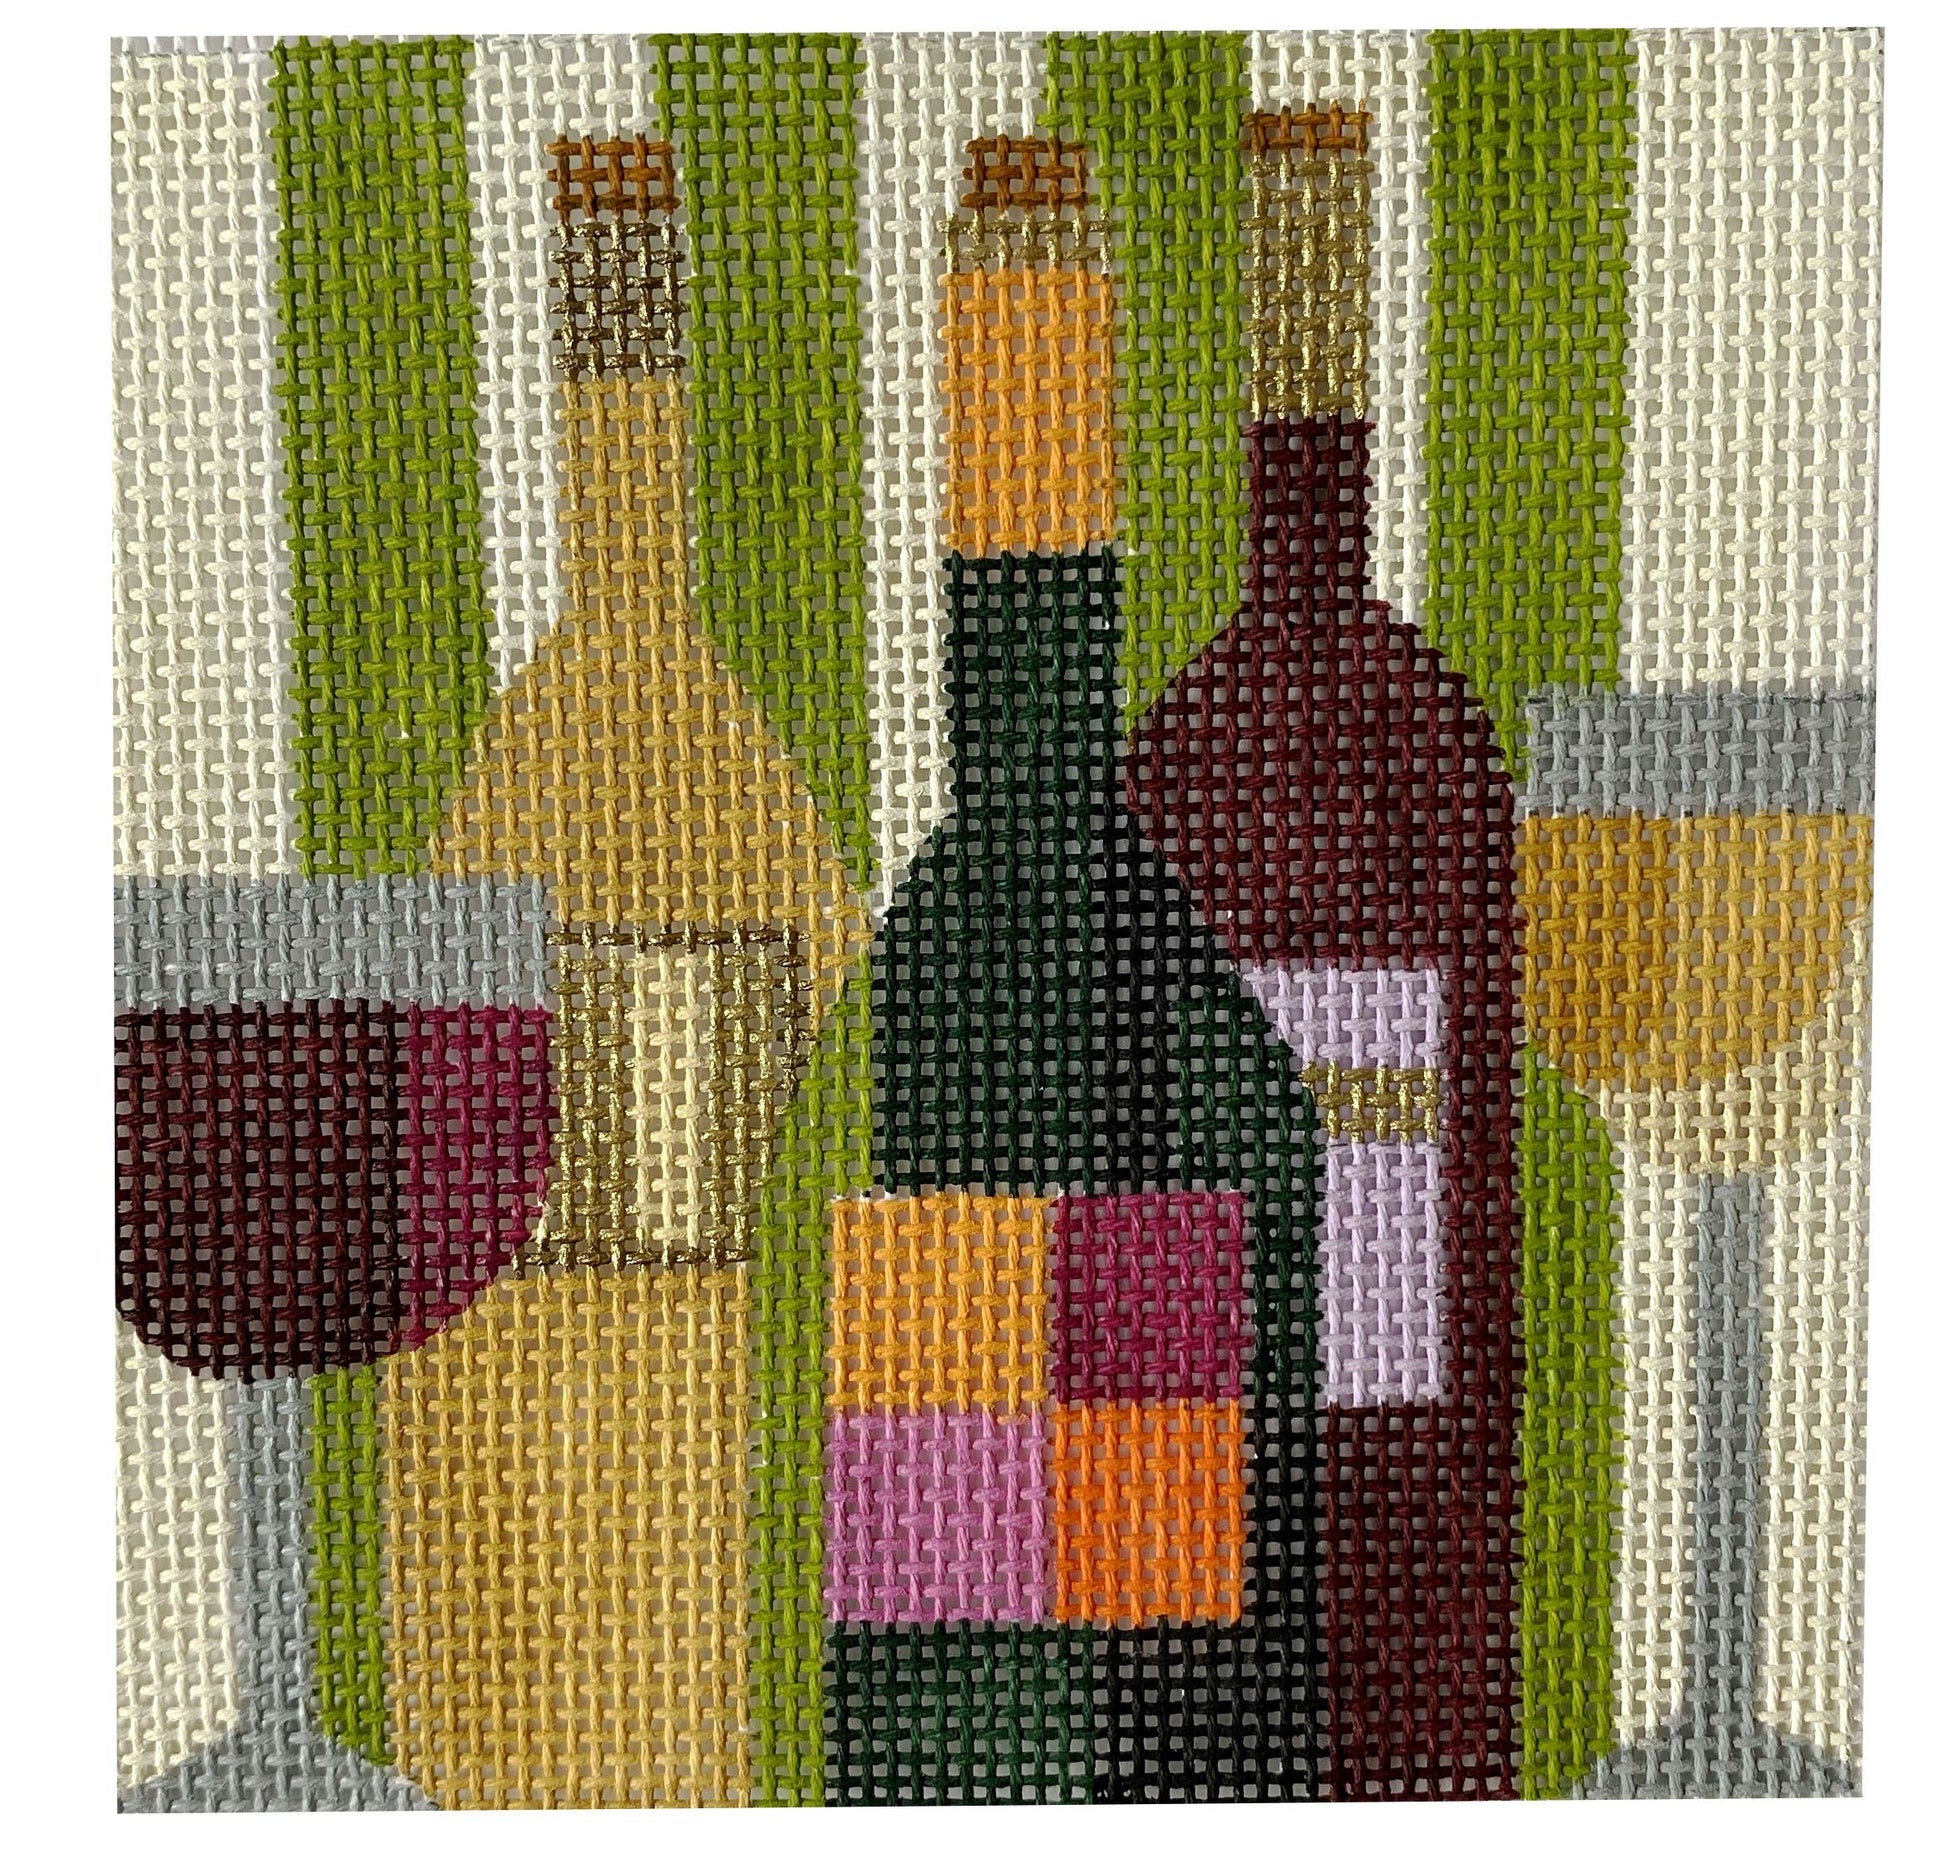 Travel Coaster - Wine Country Painted Canvas Melissa Prince Designs 